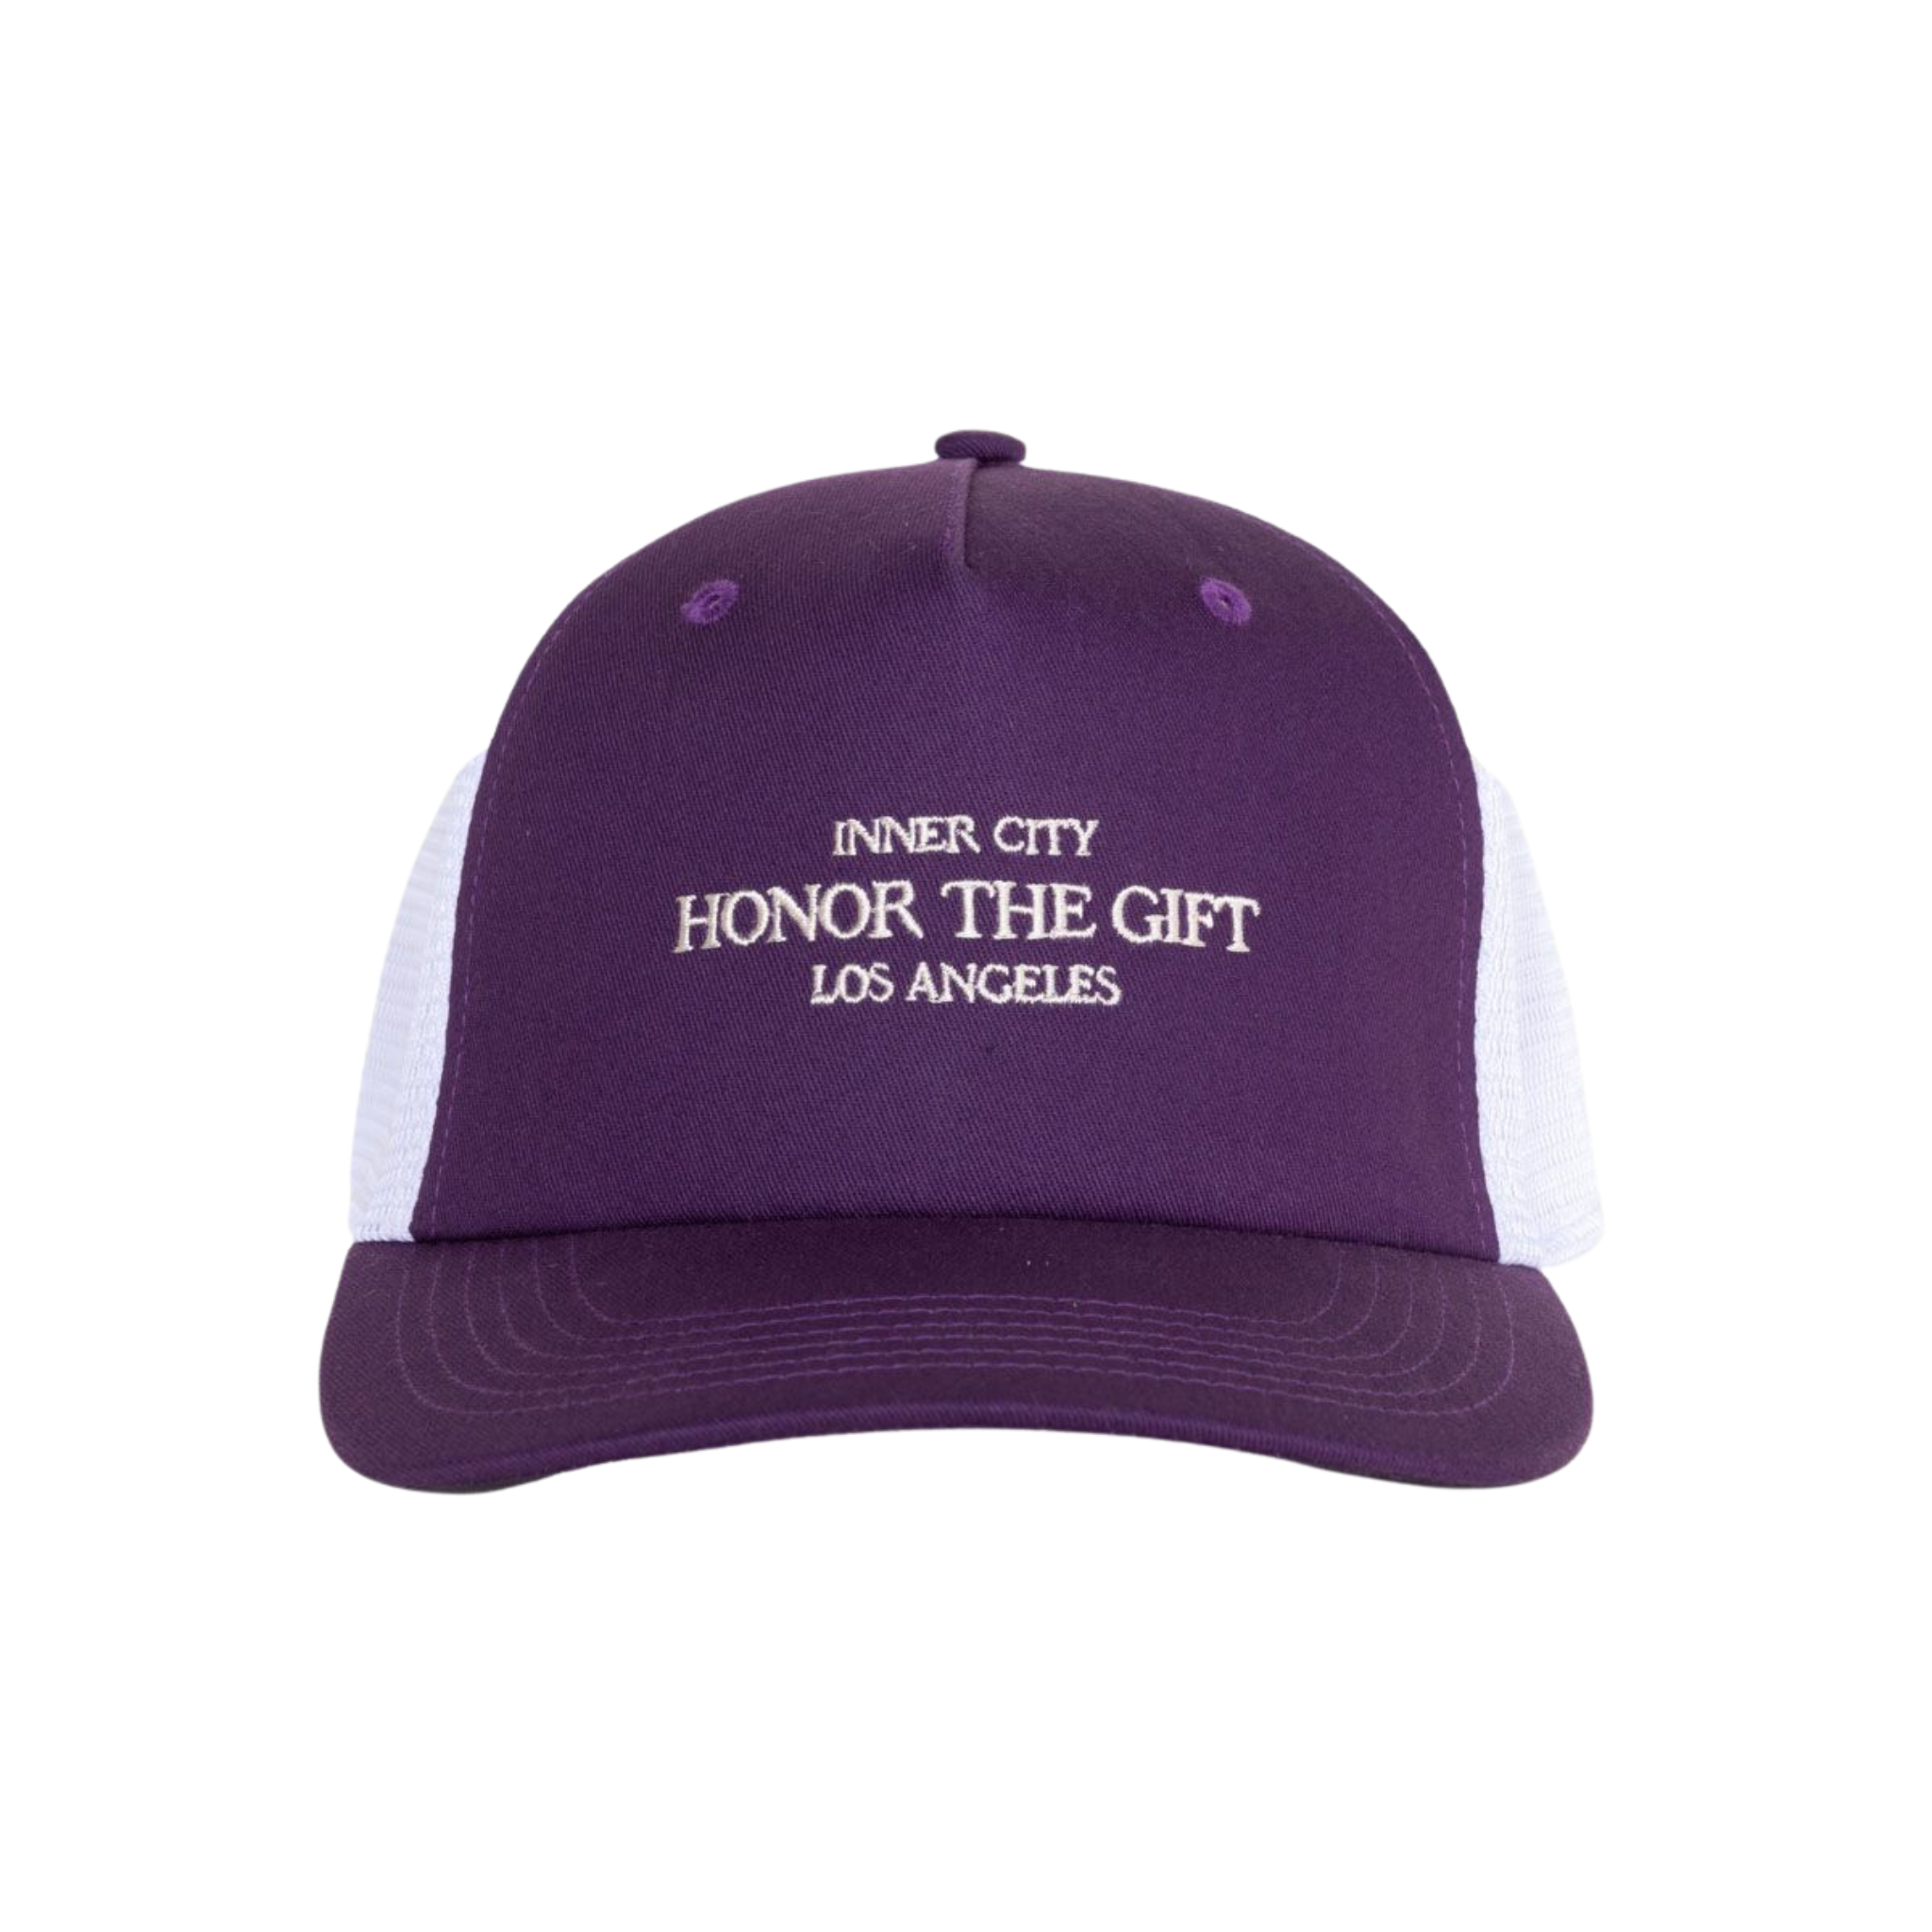 Honor The Gift Inner City Signature Cap (Purple) - Honor The Gift